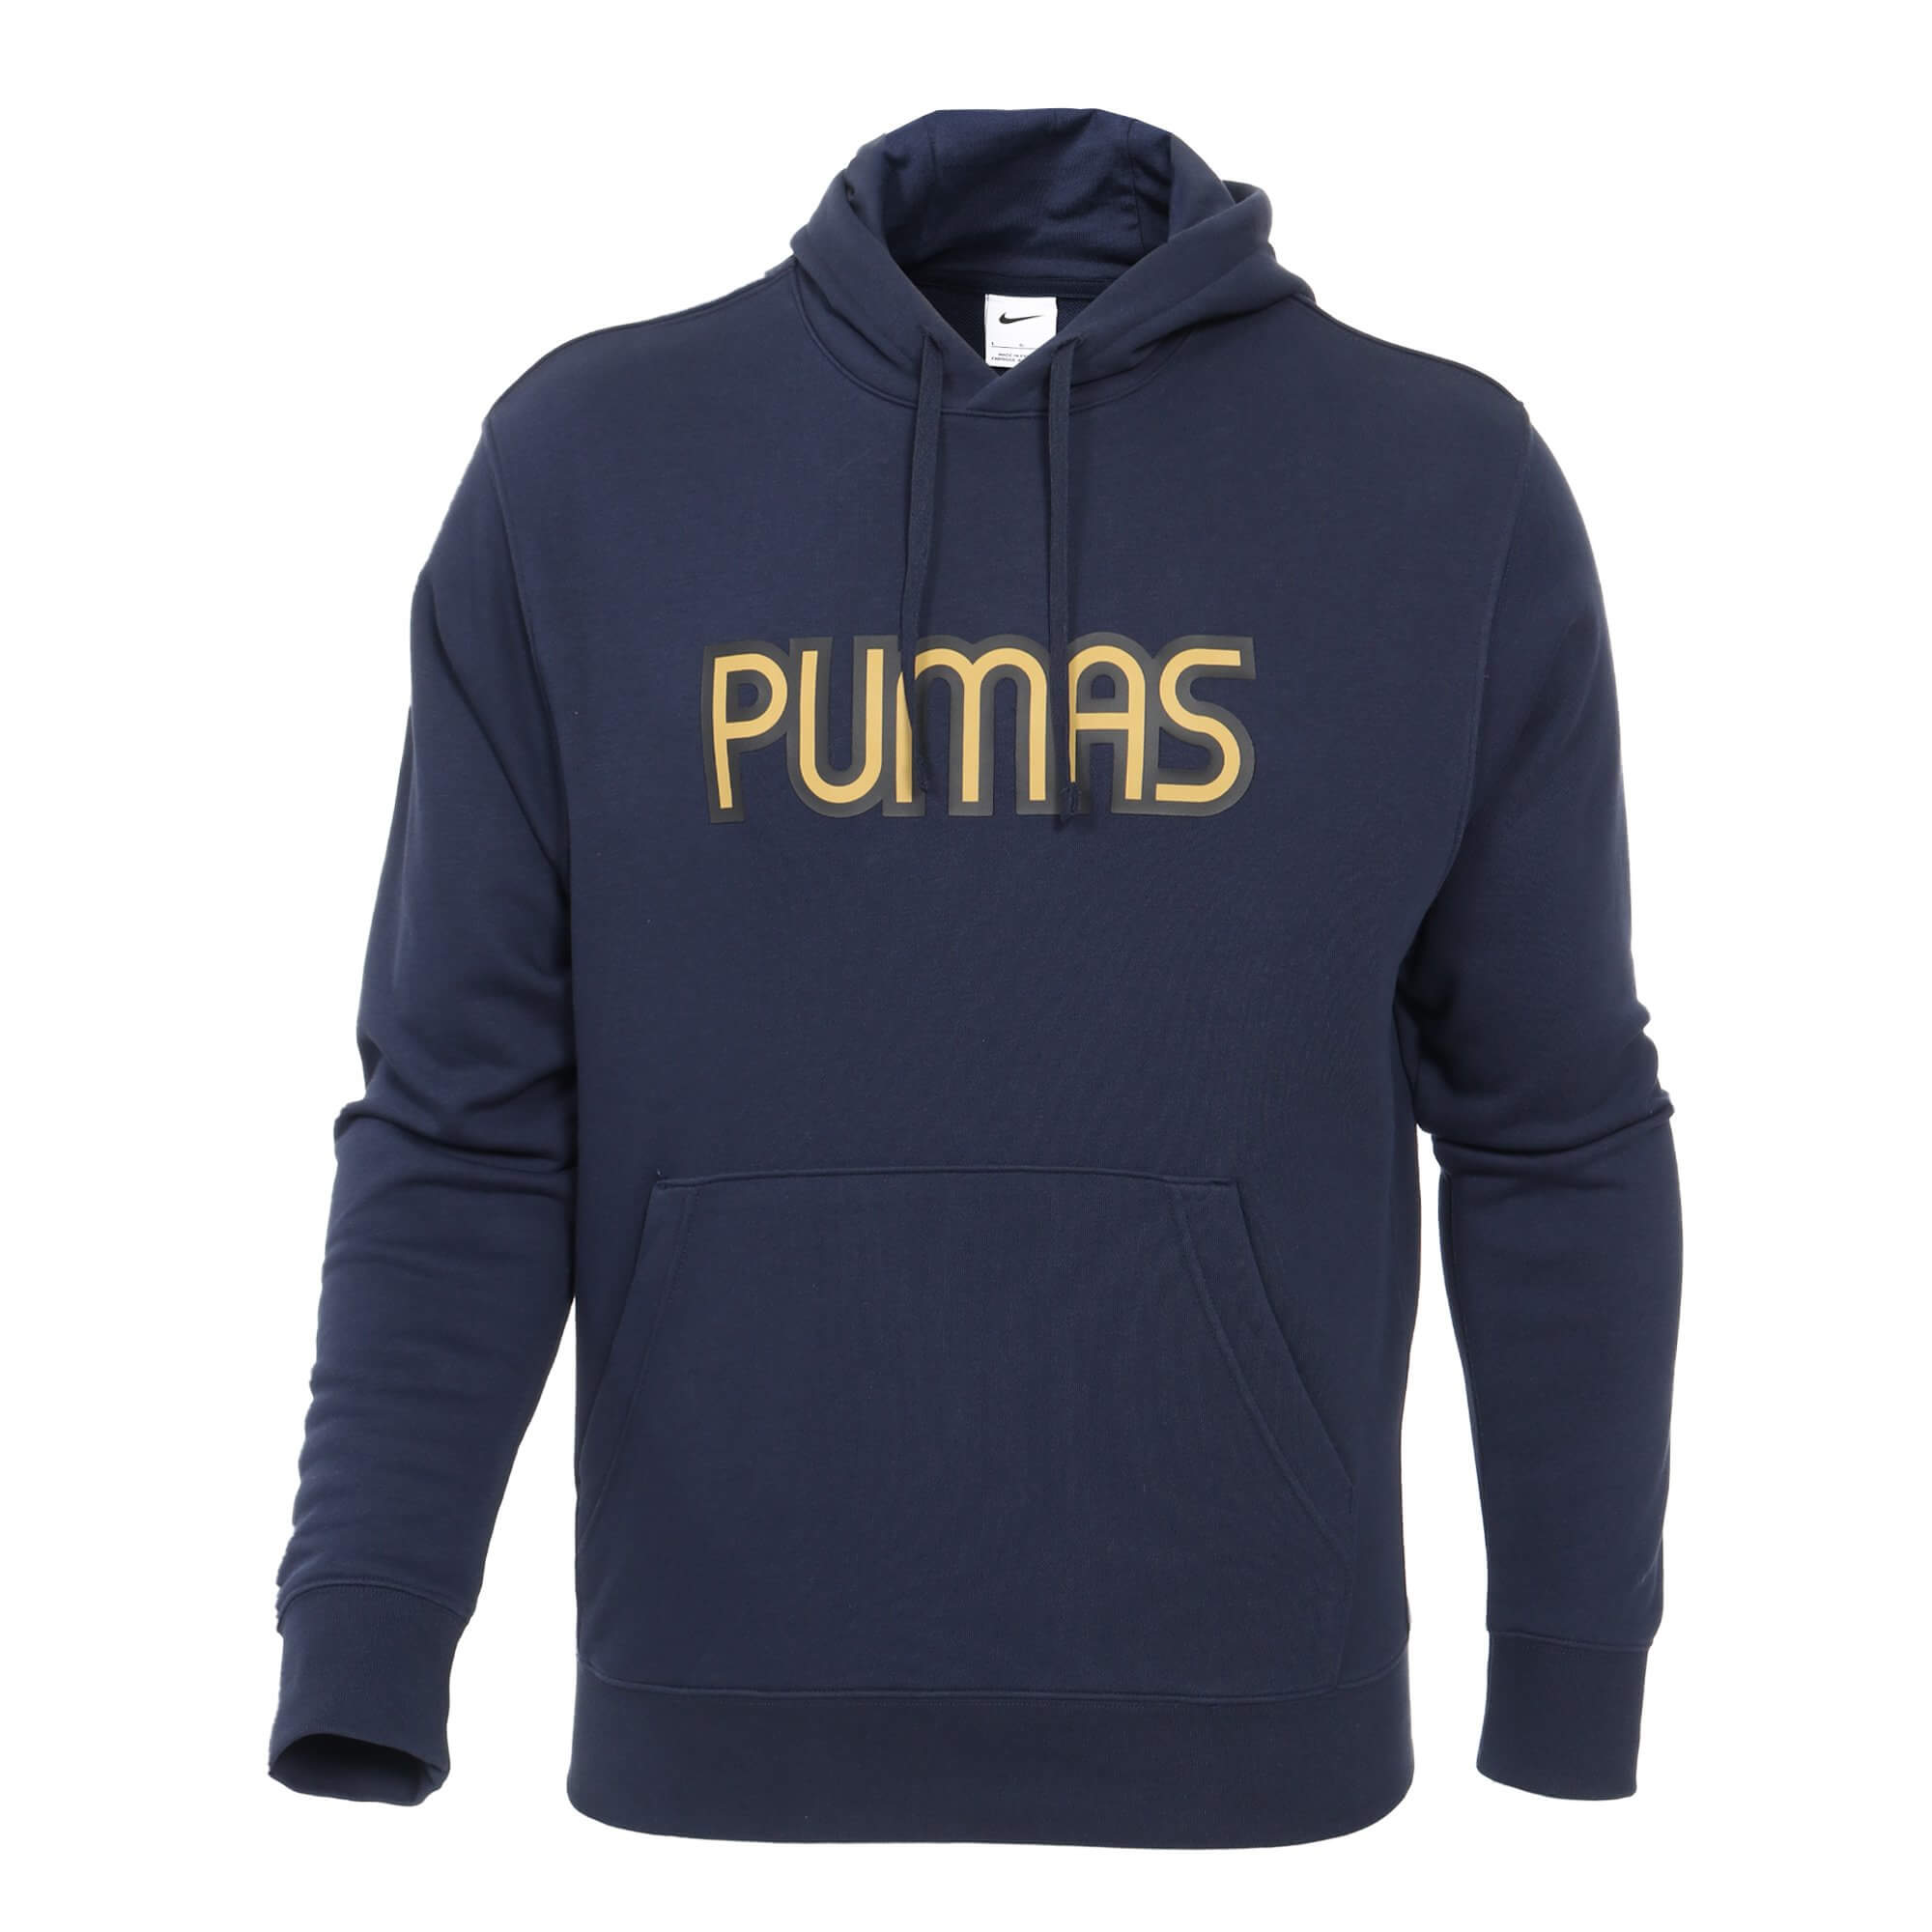 Pumas UNAM Club Men's Nike Soccer French Terry Pullover Hoodie